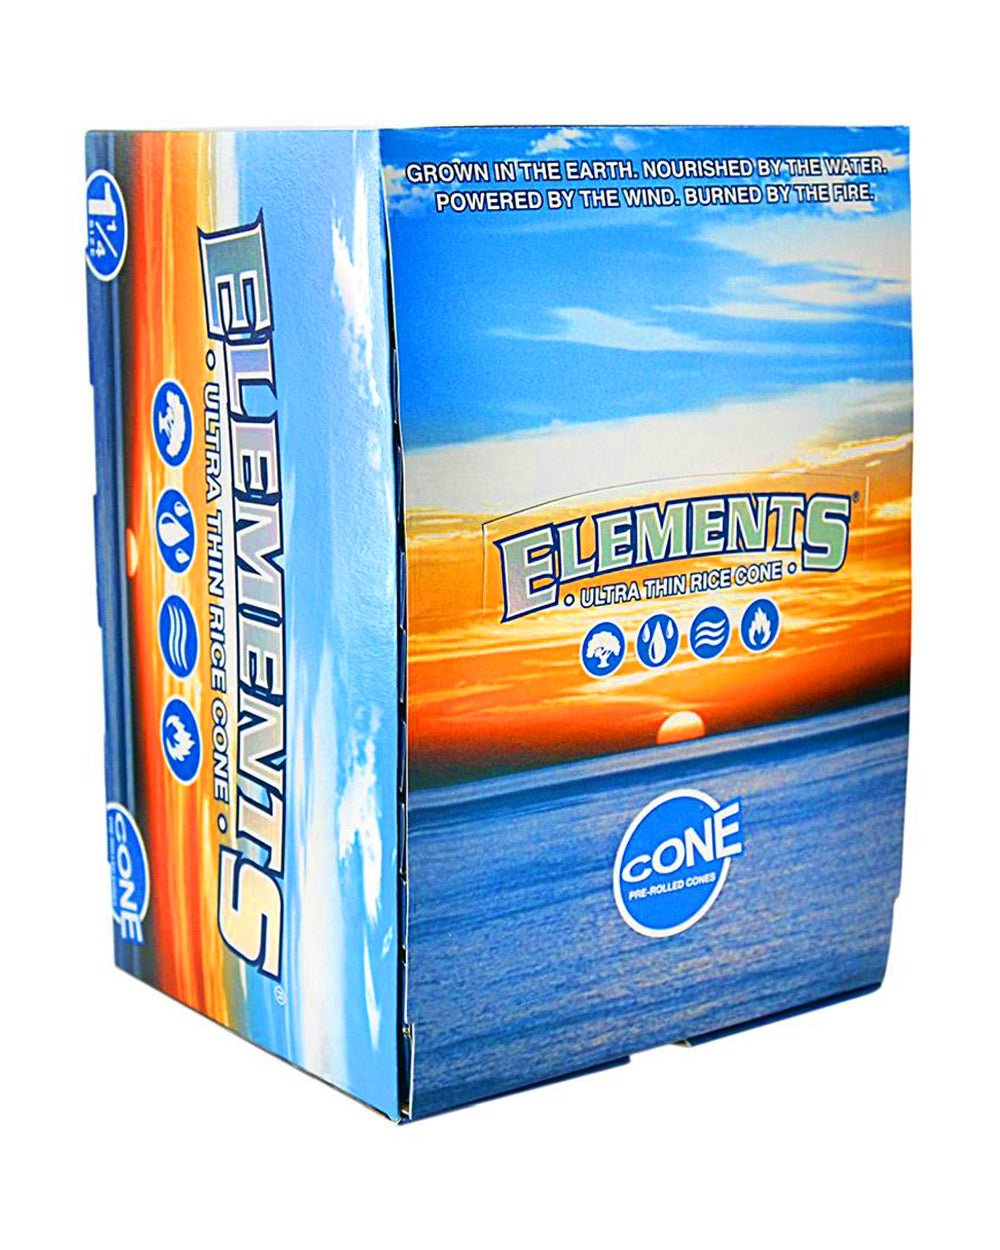 ELEMENTS | 'Retail Display' Ultra Thin Pre-Rolled Rice Cones | 84mm - Rice Paper - 180 Count - 3